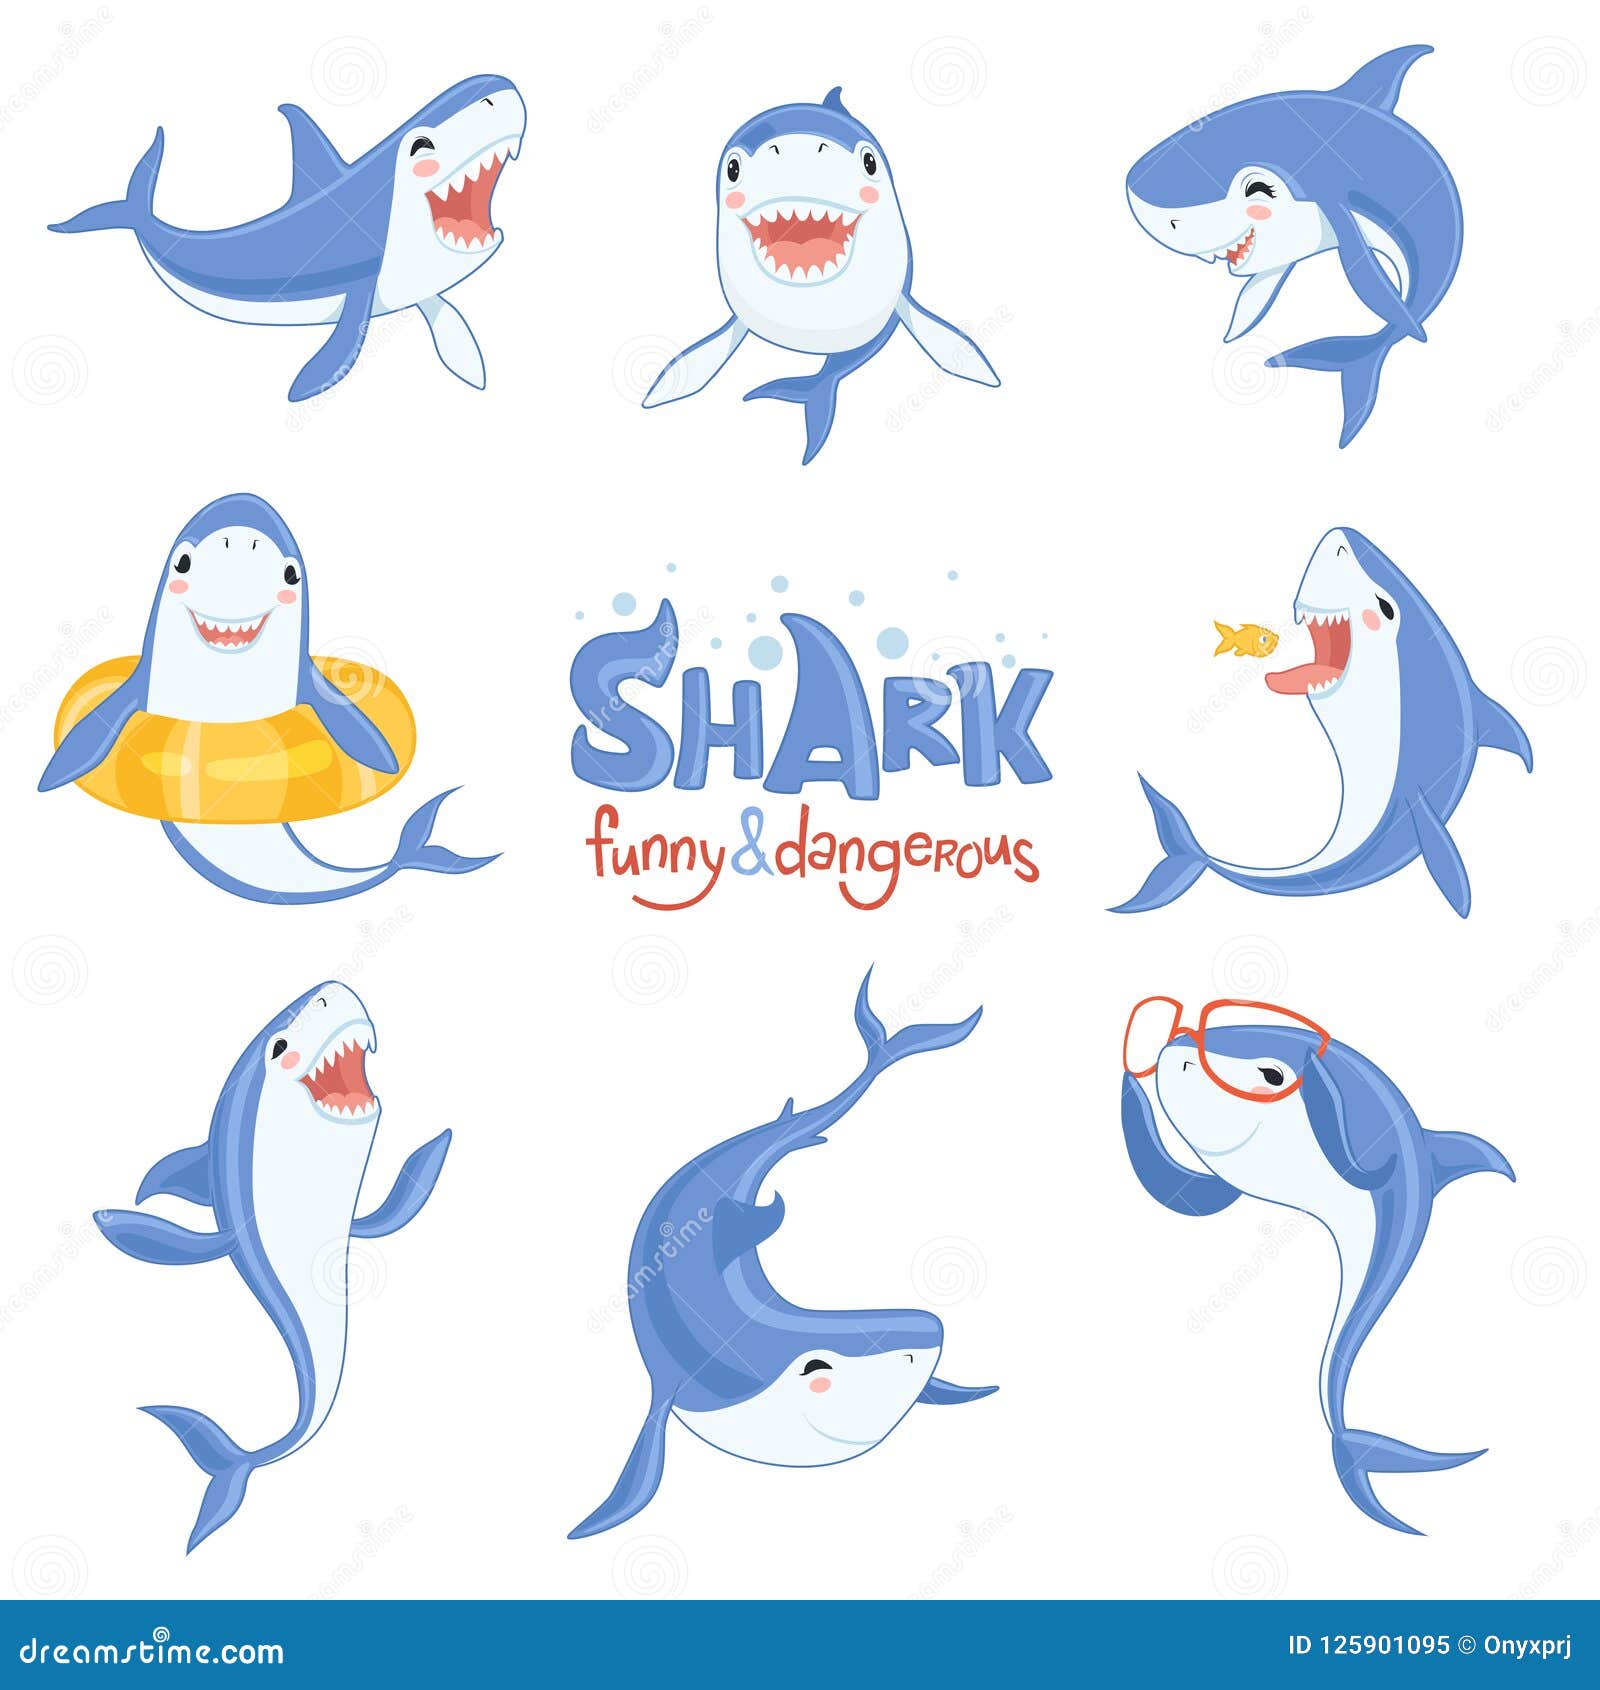 Shark Cute Animal. Fish Attack Playing Hungry and Happy Ocean Sea Shark  with Big Teeth Scary Blue Vector Characters Stock Vector - Illustration of  predator, mouth: 125901095